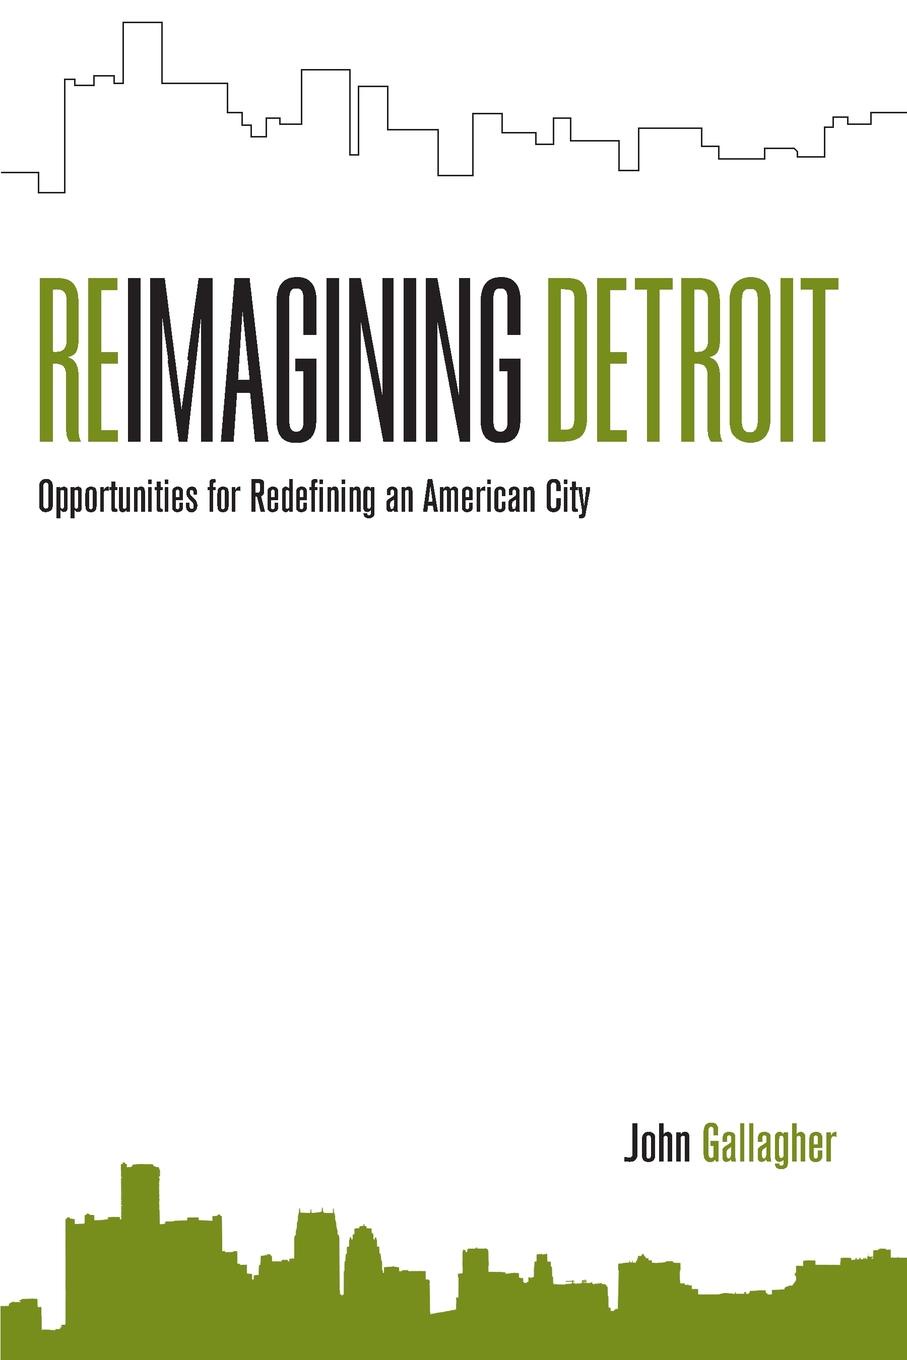 Reimagining Detroit. Opportunities for Redefining an American City